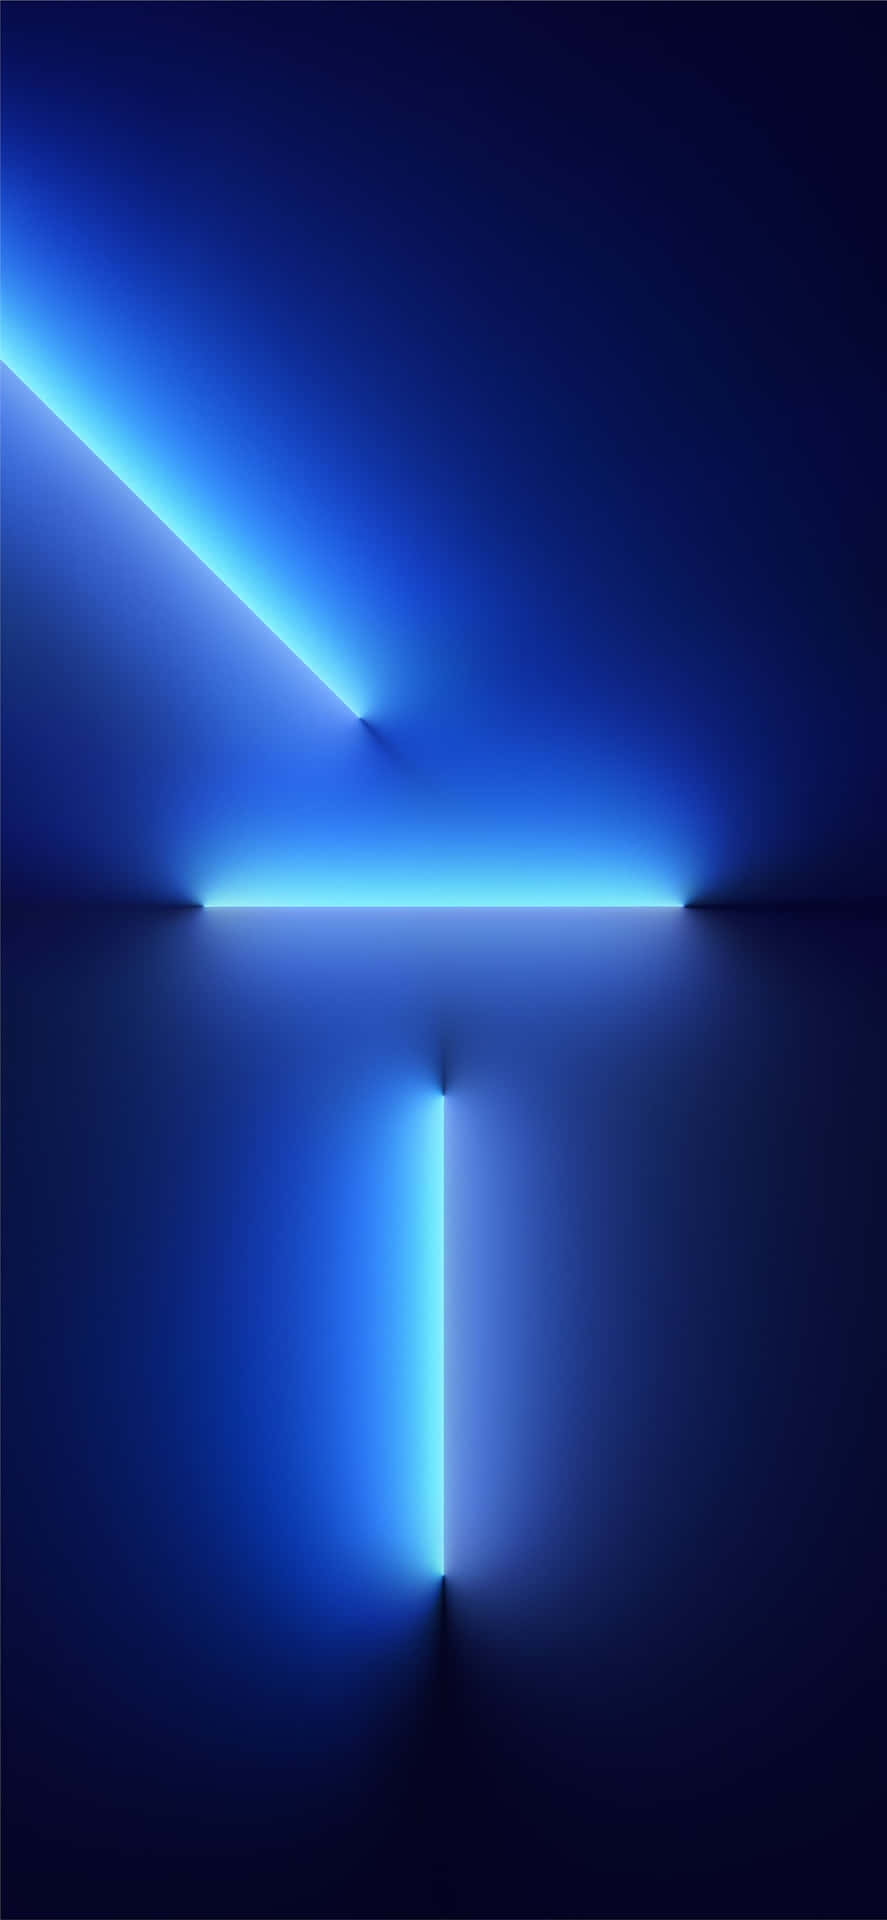 A Blue Light With A Blue Background Wallpaper